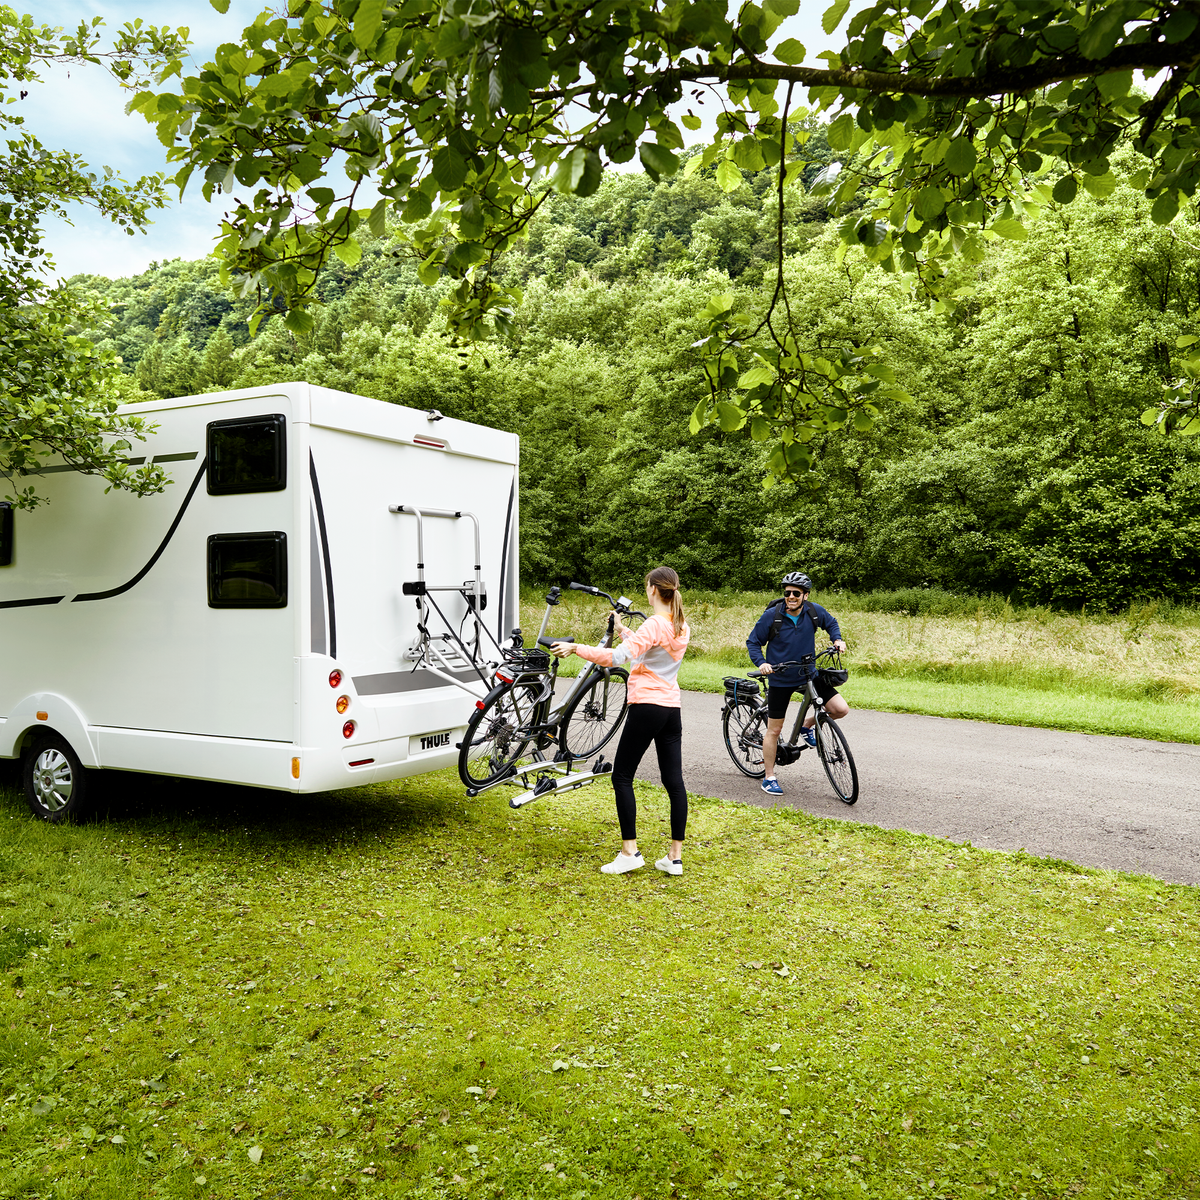 A motorhome parked in the grass and people unload bikes from a Thule Lift V16  rv bike rack.